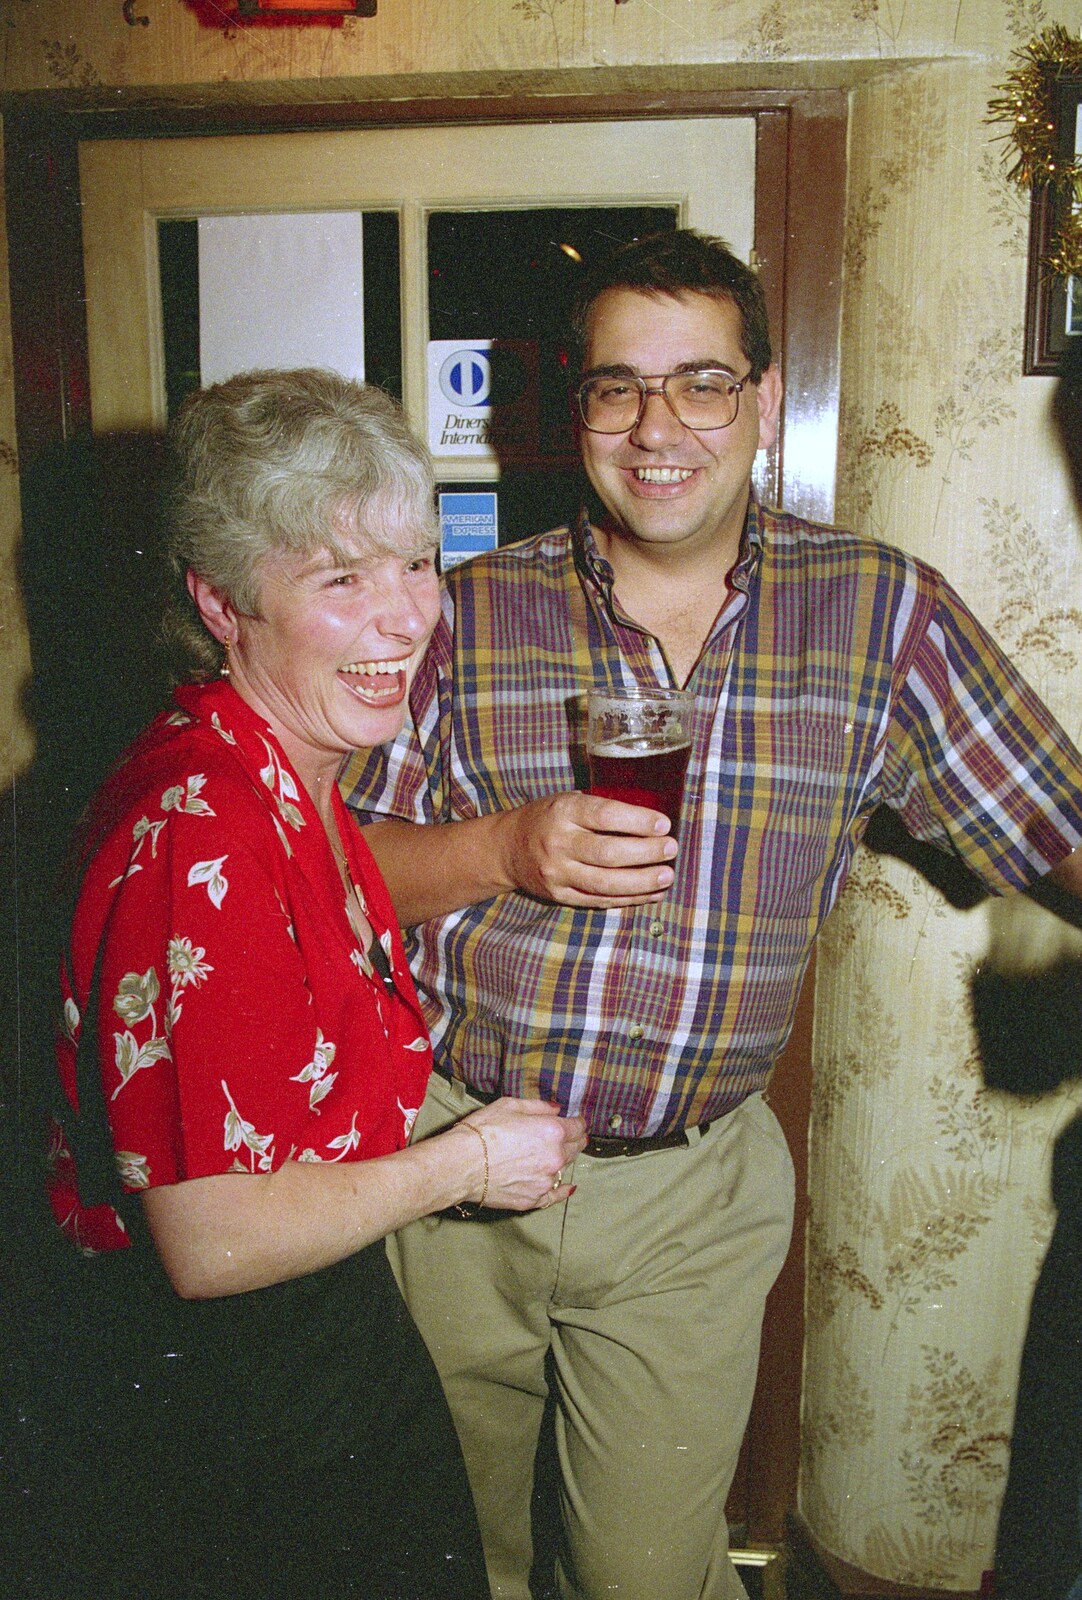 Spam and Roger from New Year's Eve in the Swan Inn, Brome, Suffolk - 31st December 1995